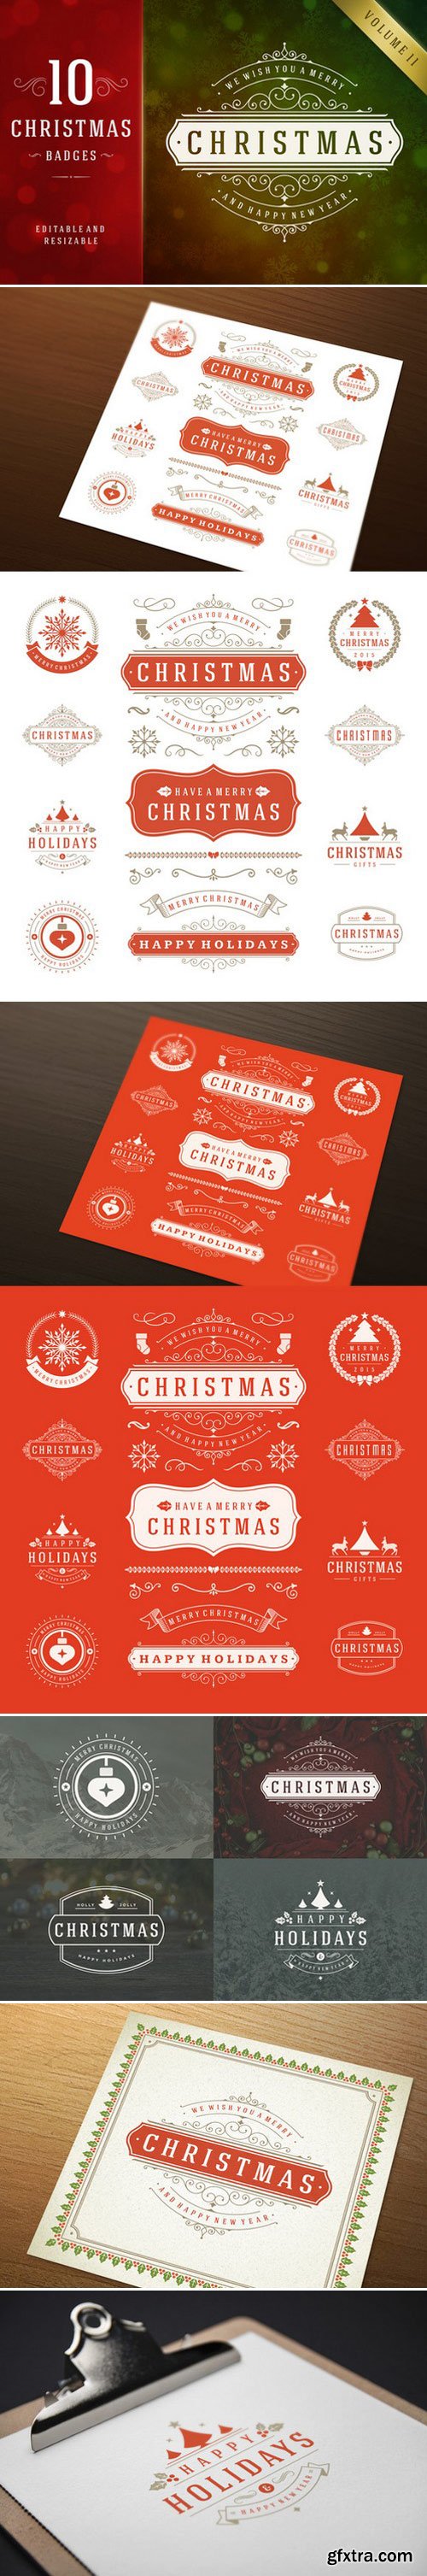 CM - 10 Christmas labels and badges 431297